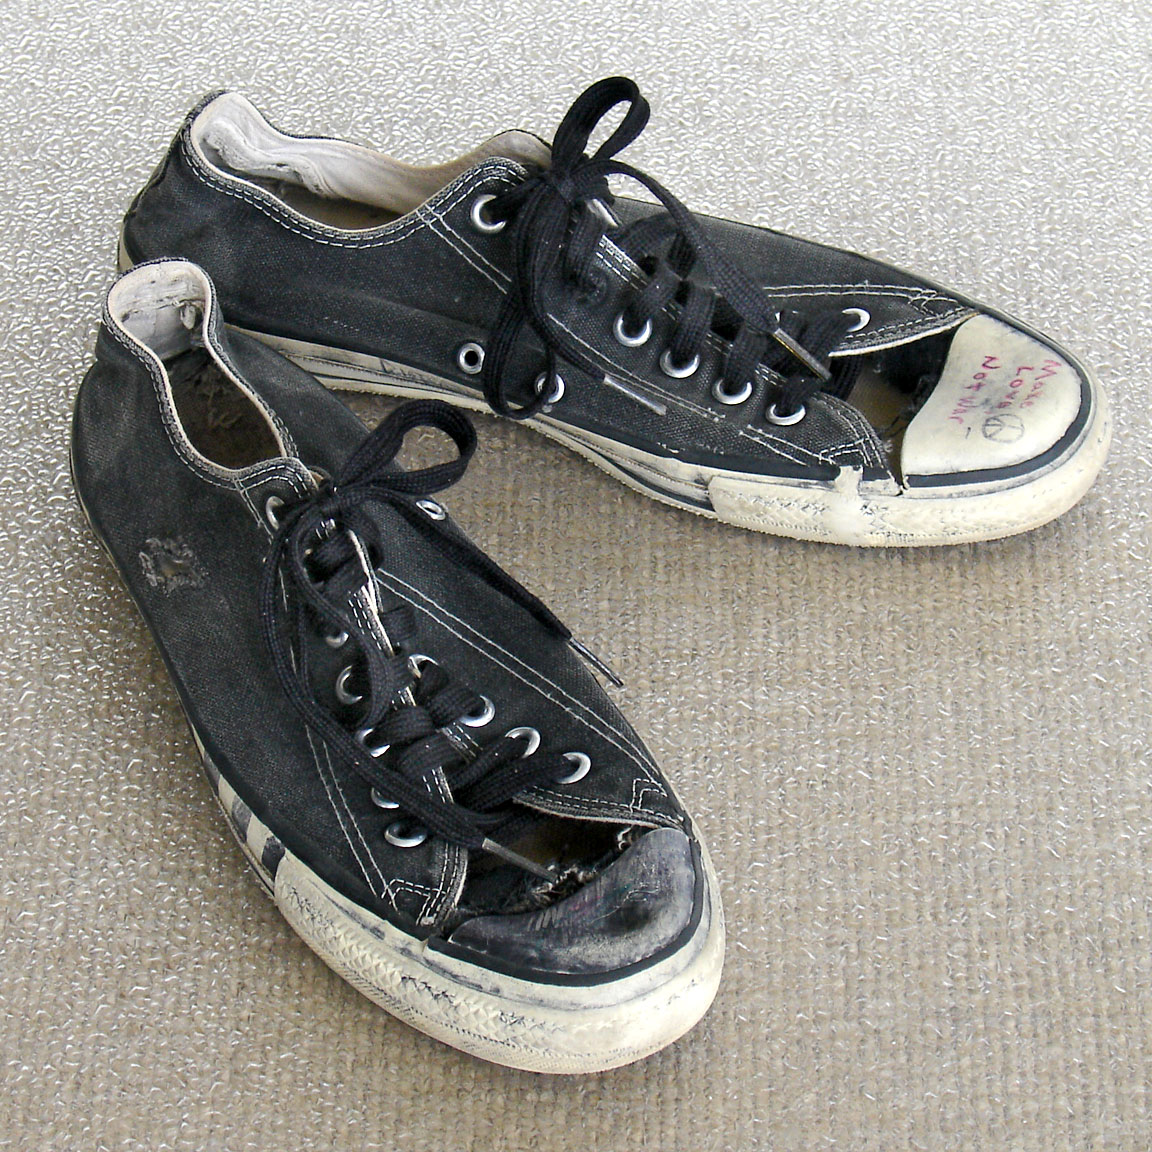 Vintage thrashed American-made Converse All Star Chuck Taylor shoes for sale at http://www.collectornet.net/shoes